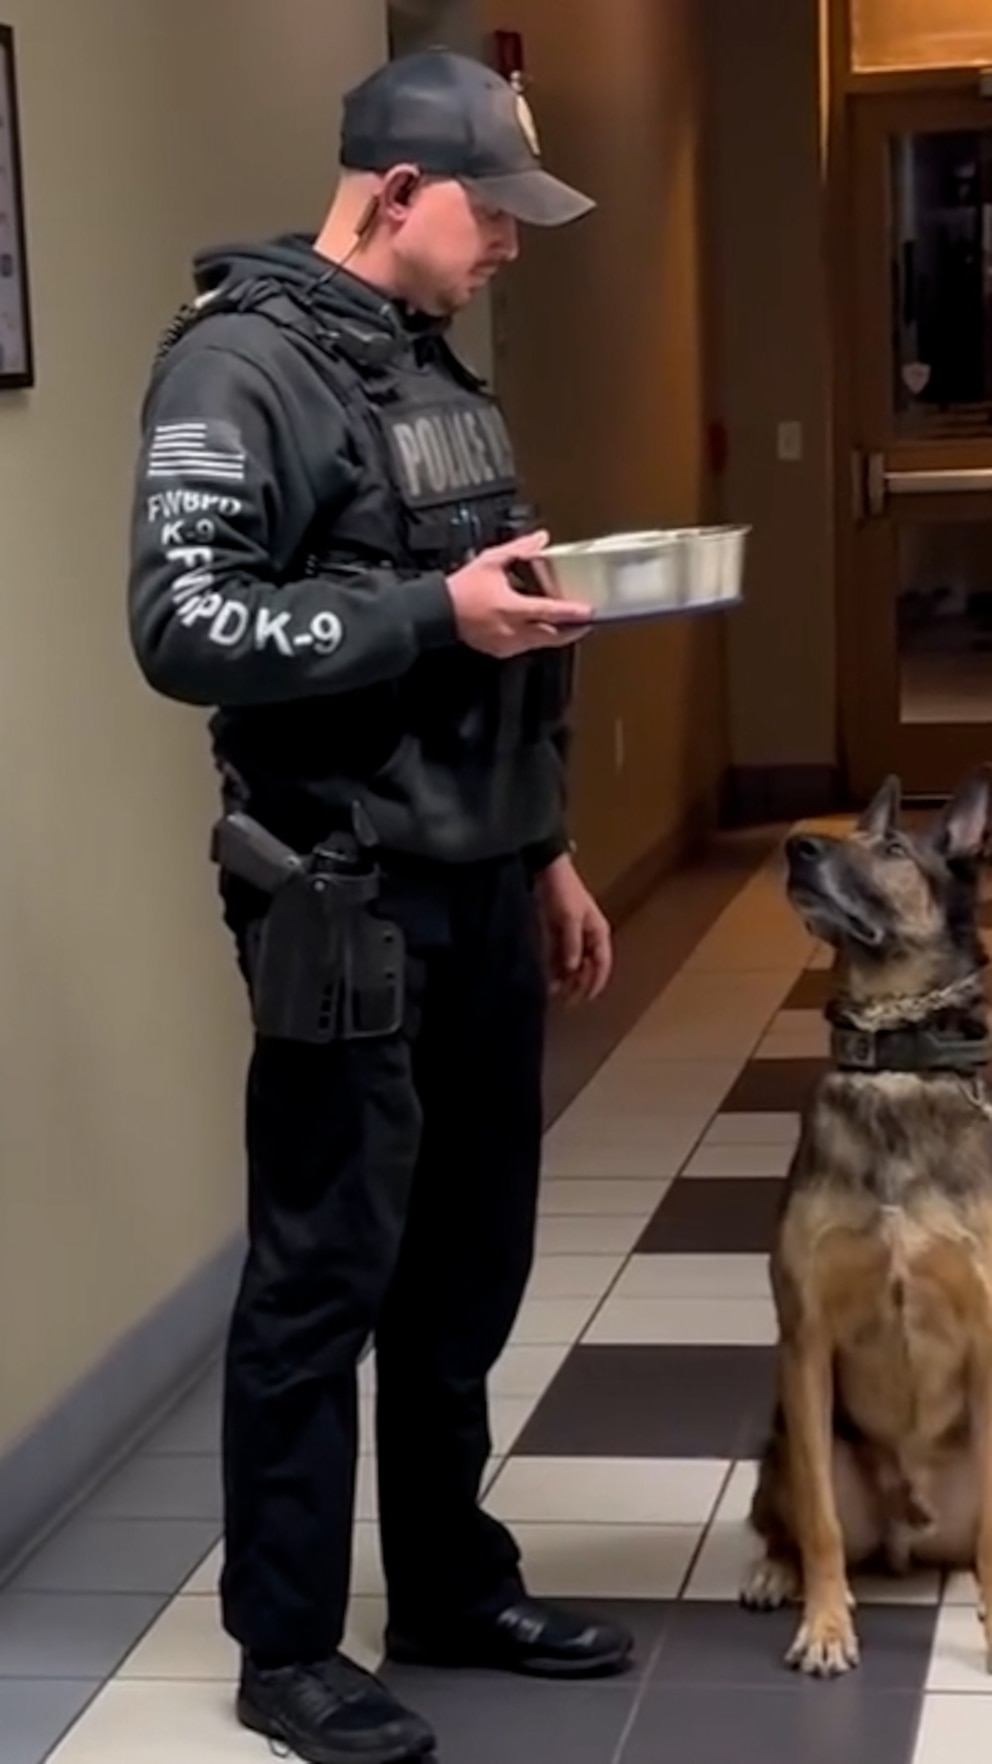 Retiring Police K-9 Receives Well-Deserved Reward: A Bowl of Whipped Cream